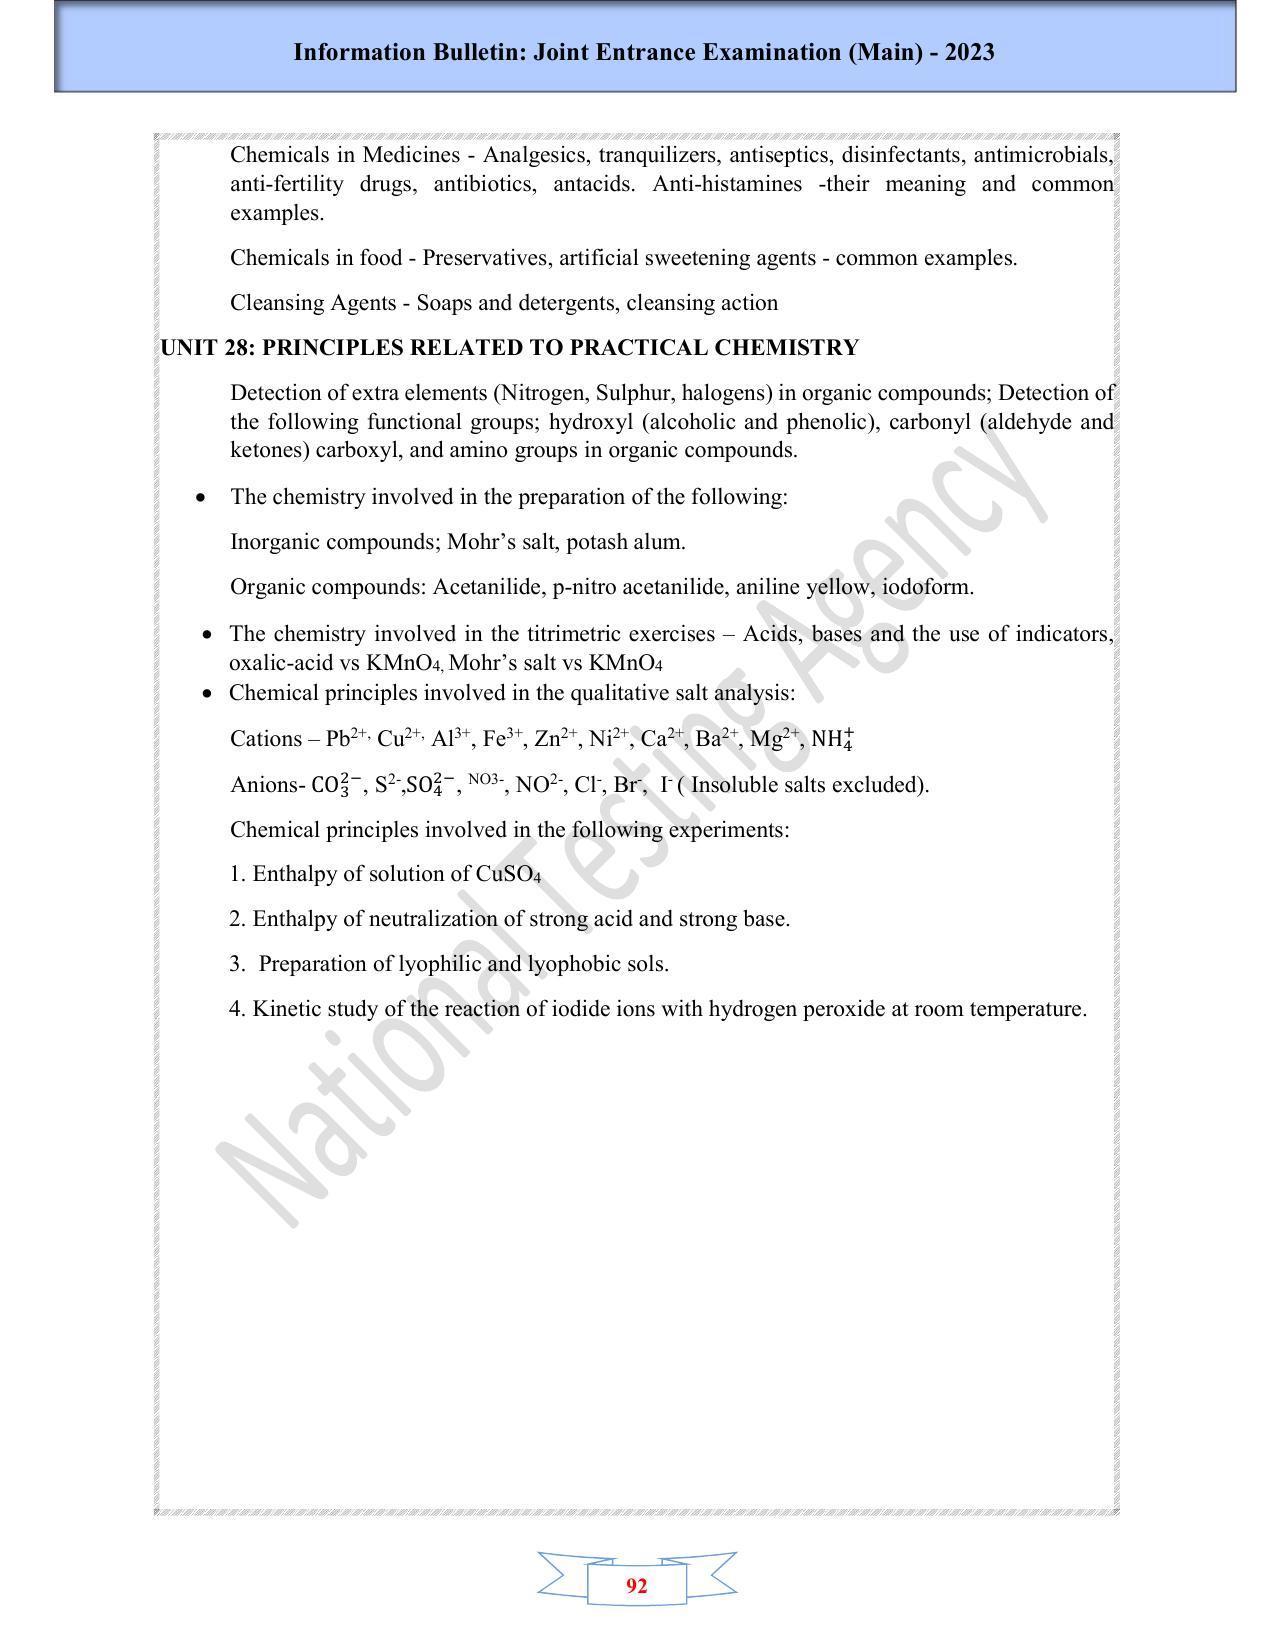 JEE Main 2023 Session 2 - Page 94